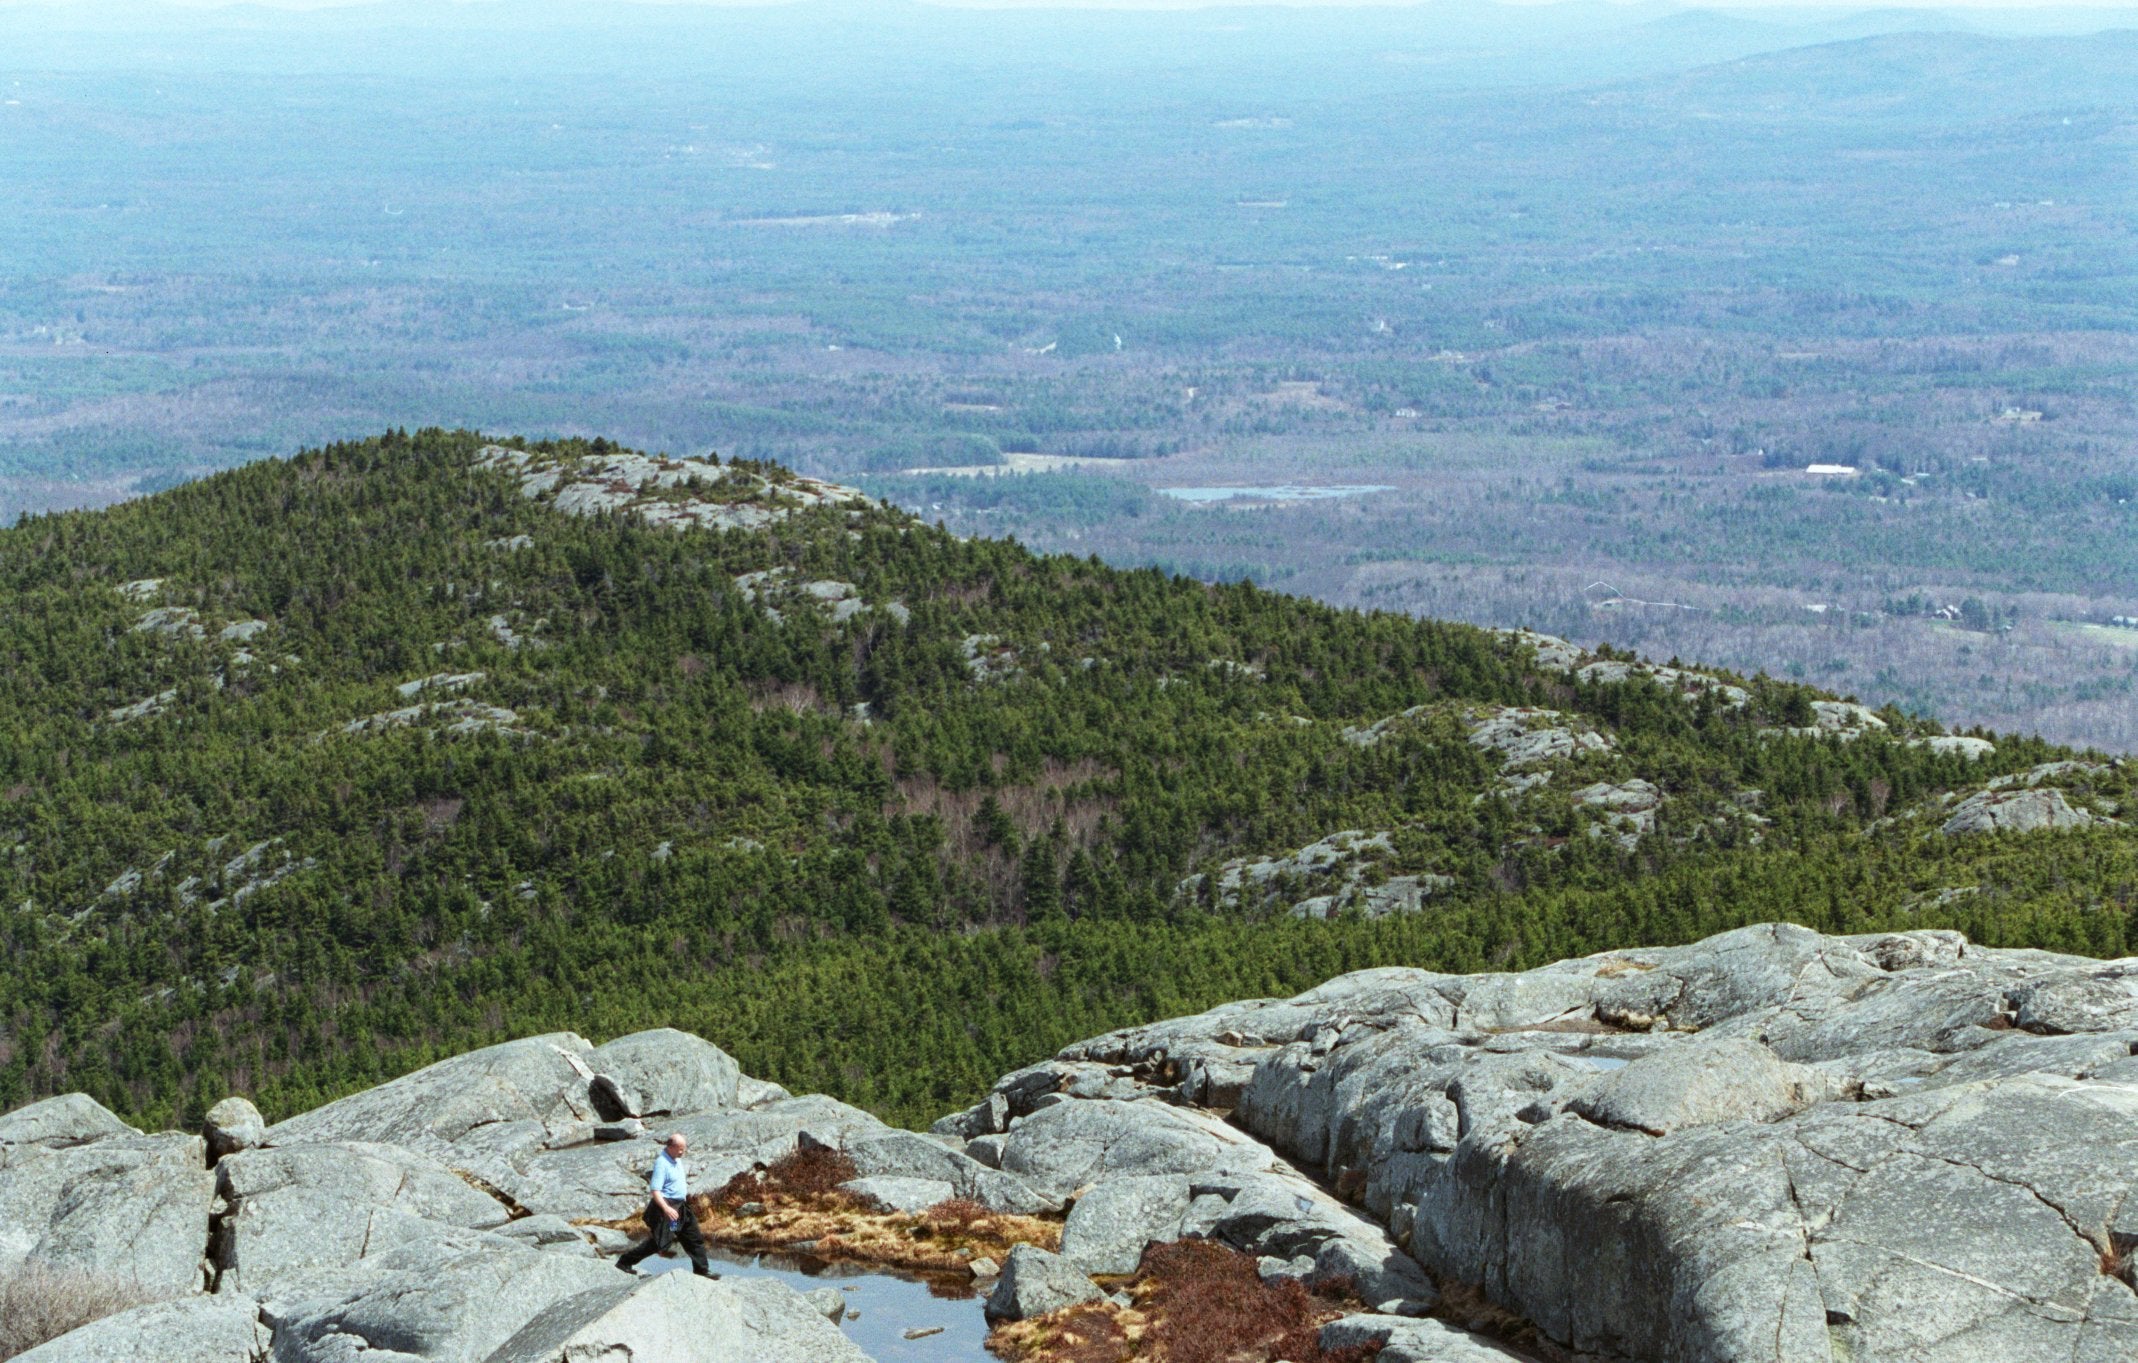 A view from the summit of Mount Monadnock in Jaffrey, N.H.